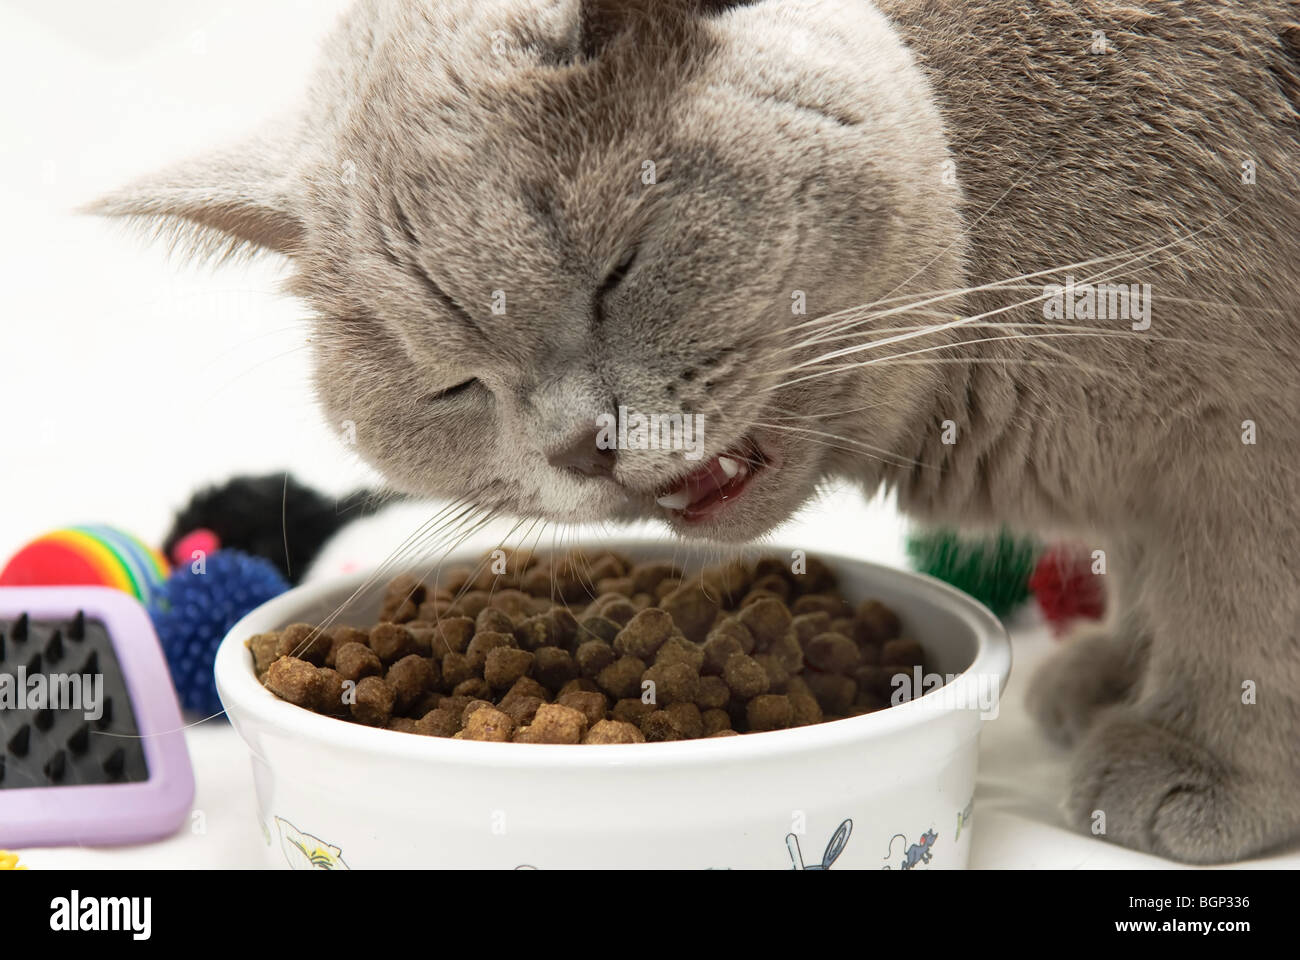 british cat eats from food cup Stock Photo